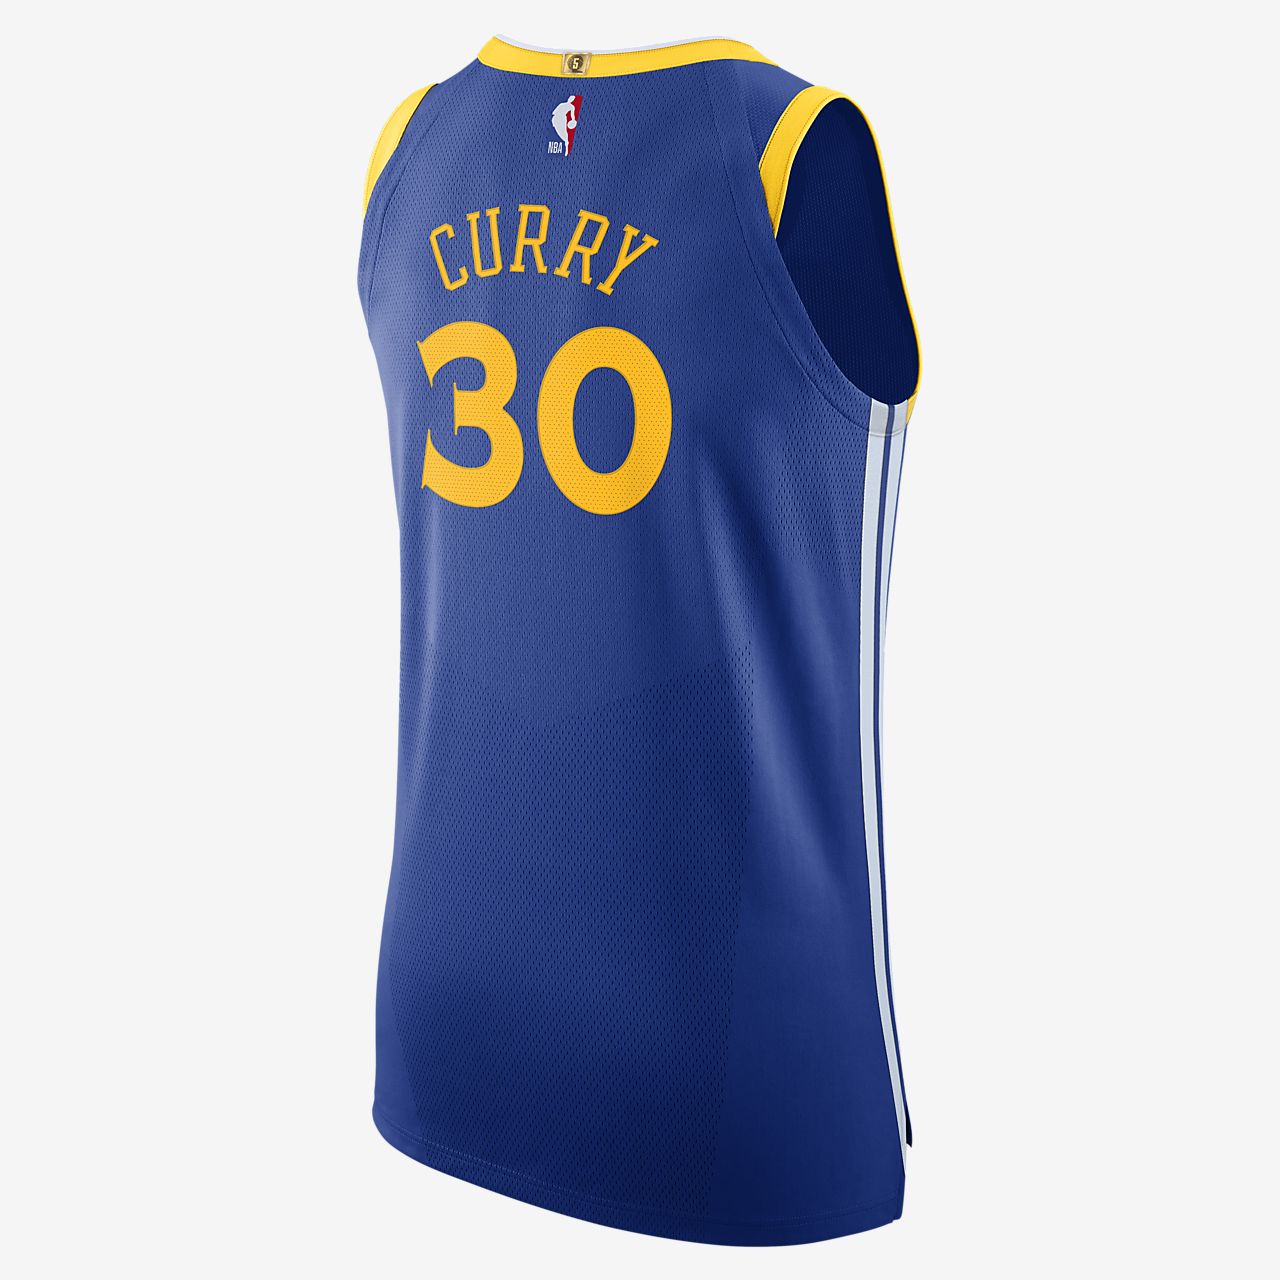 stephen curry jersey images